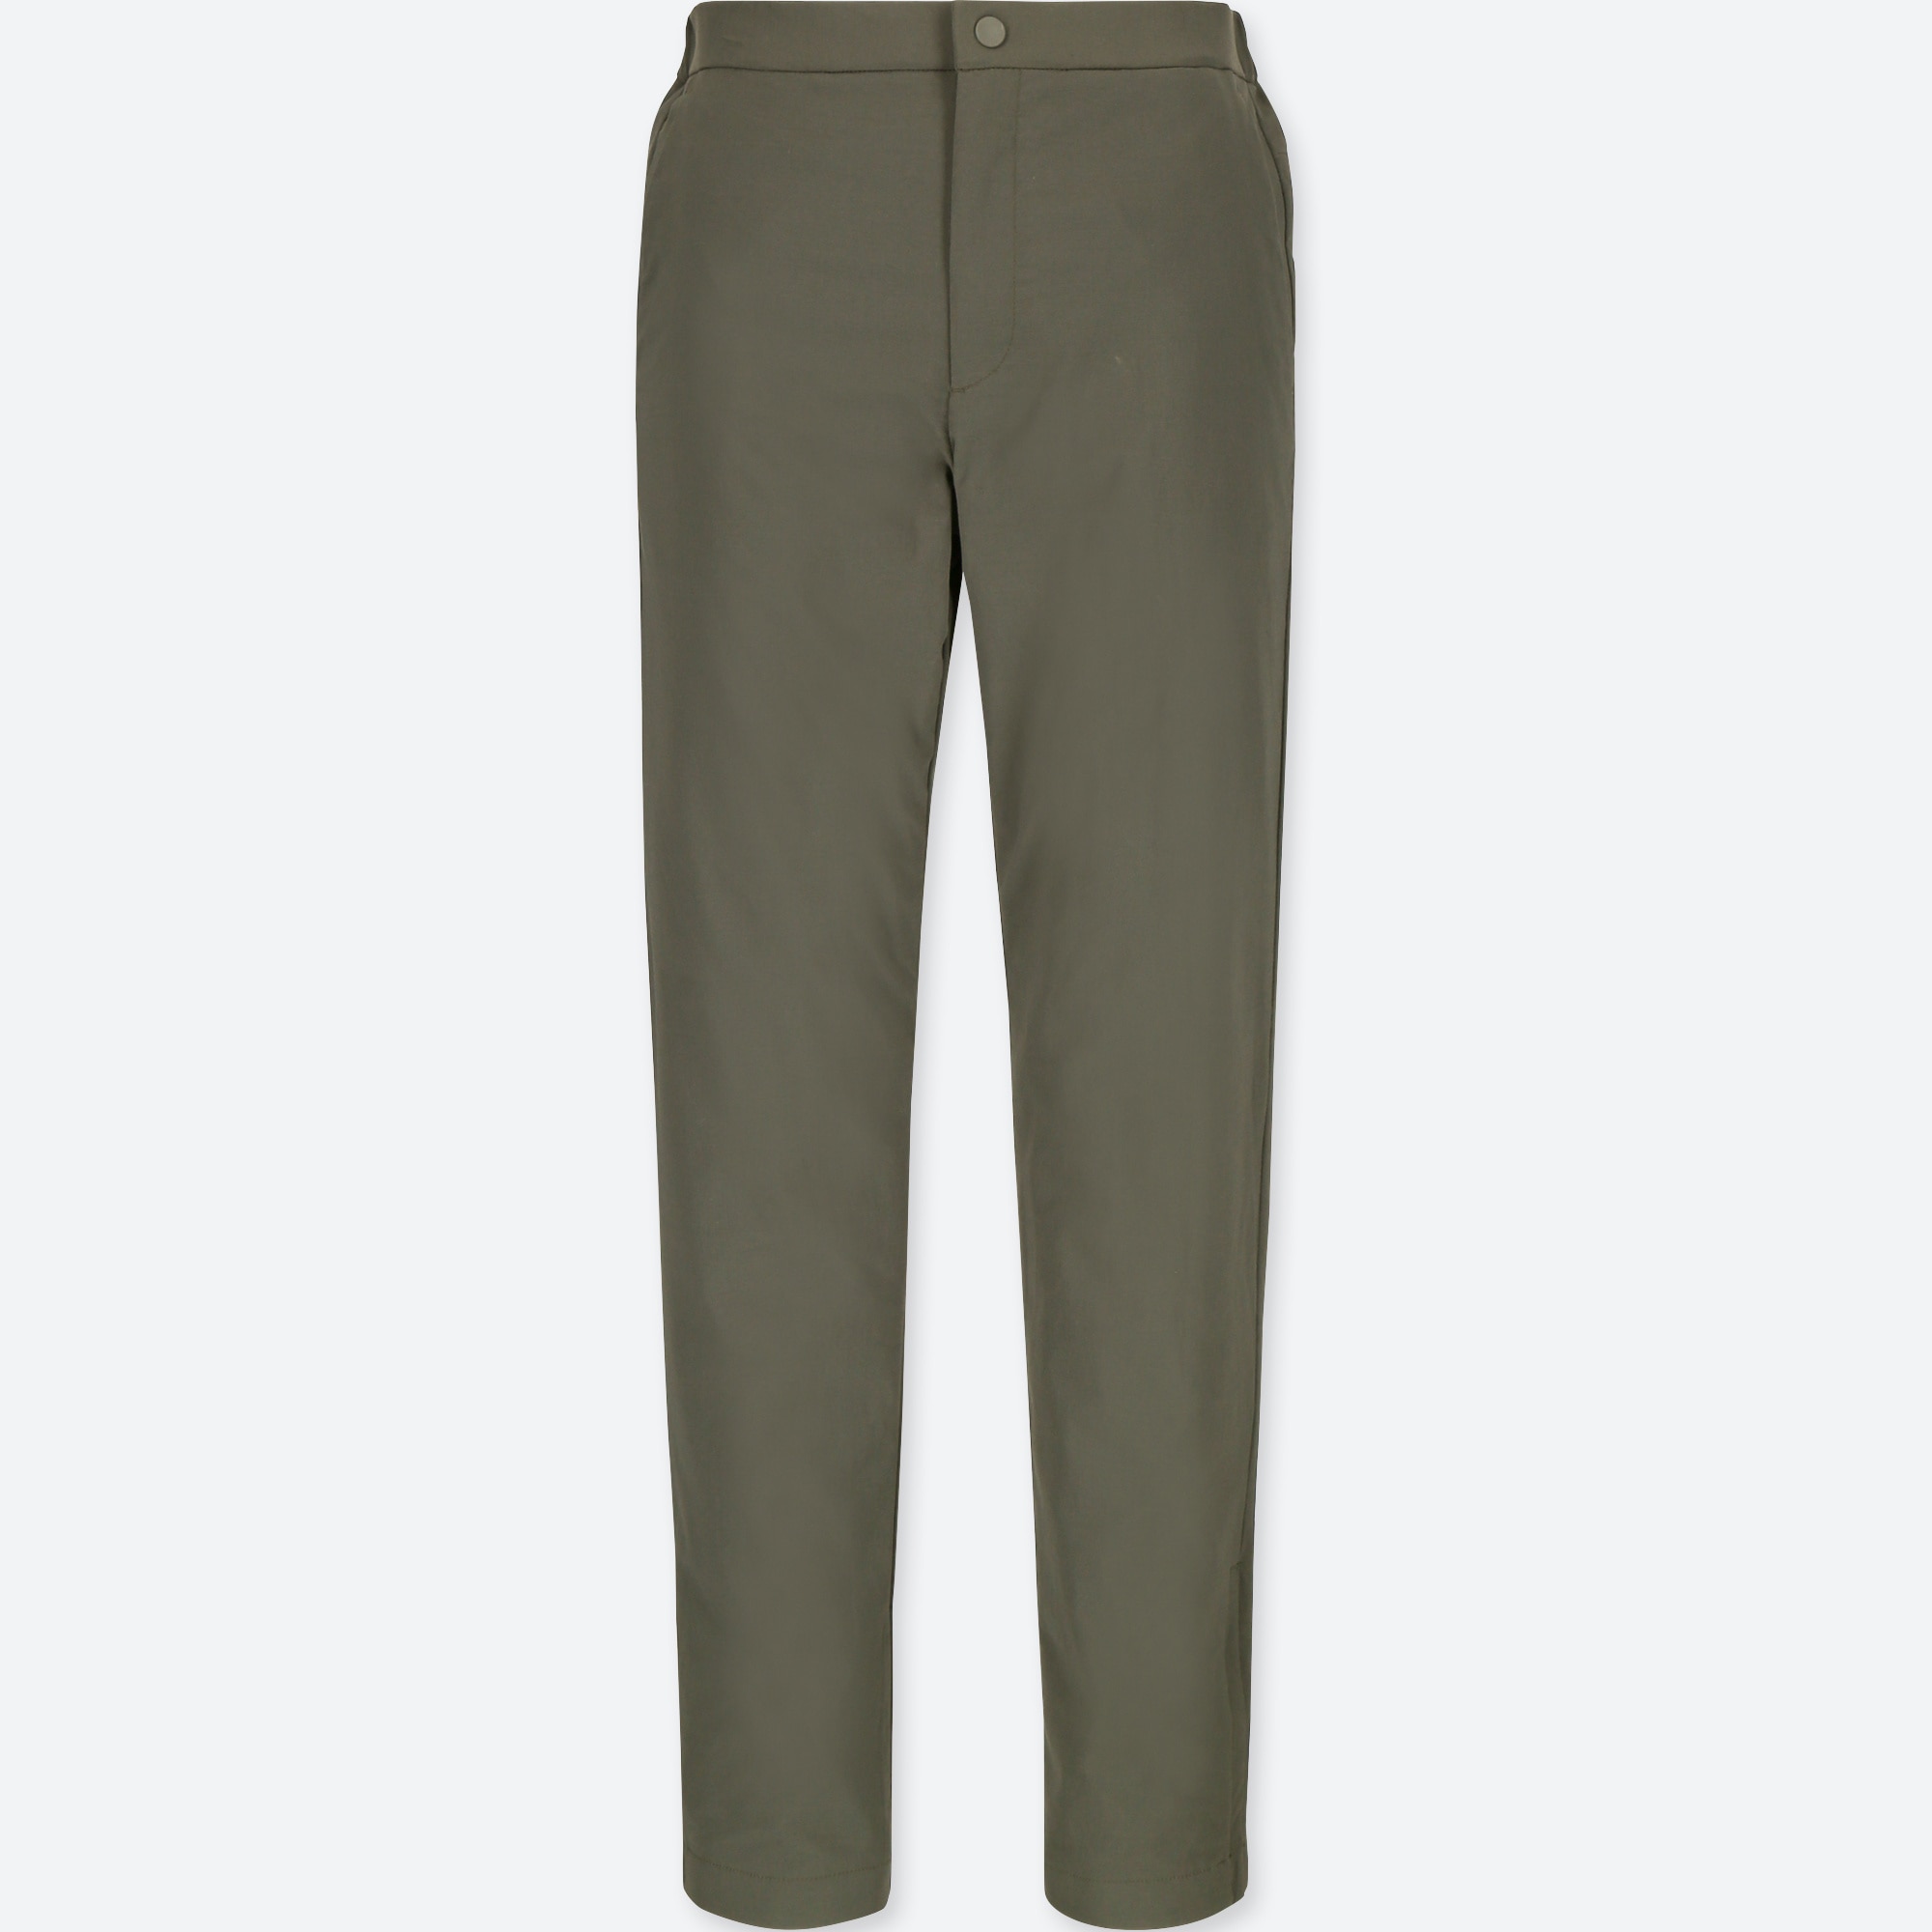 womens lined pants